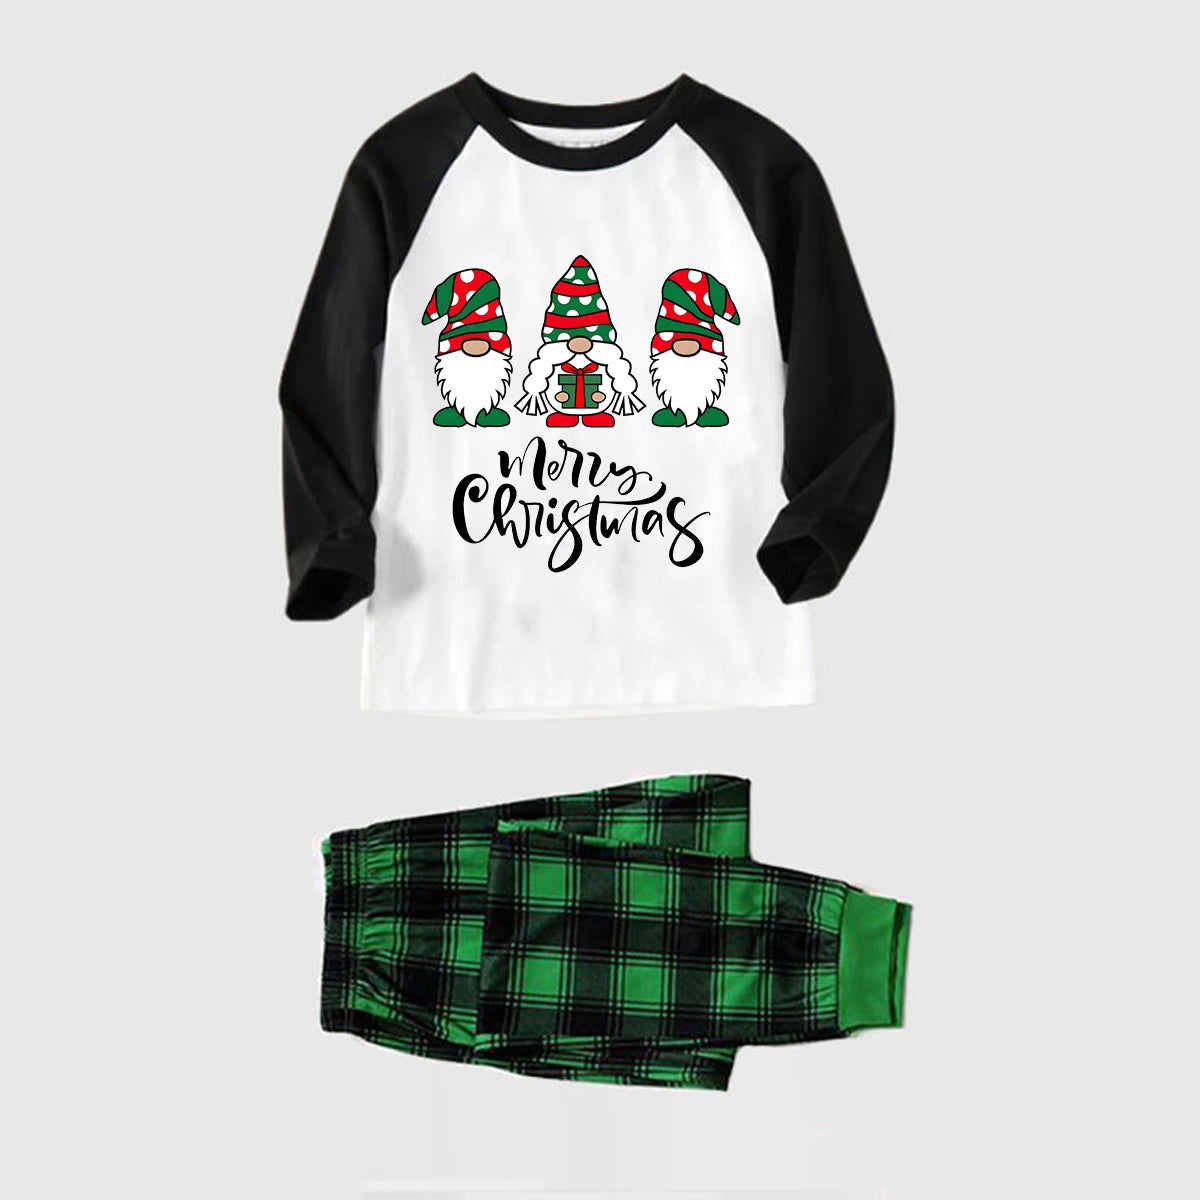 Merry Christmas Cute Gnome Print Casual Long Sleeve Sweatshirts Casual Long Sleeve Sweatshirts Black Contrast Top and Black and Green Plaid Pants Family Matching Pajamas Sets With Dog Bandana